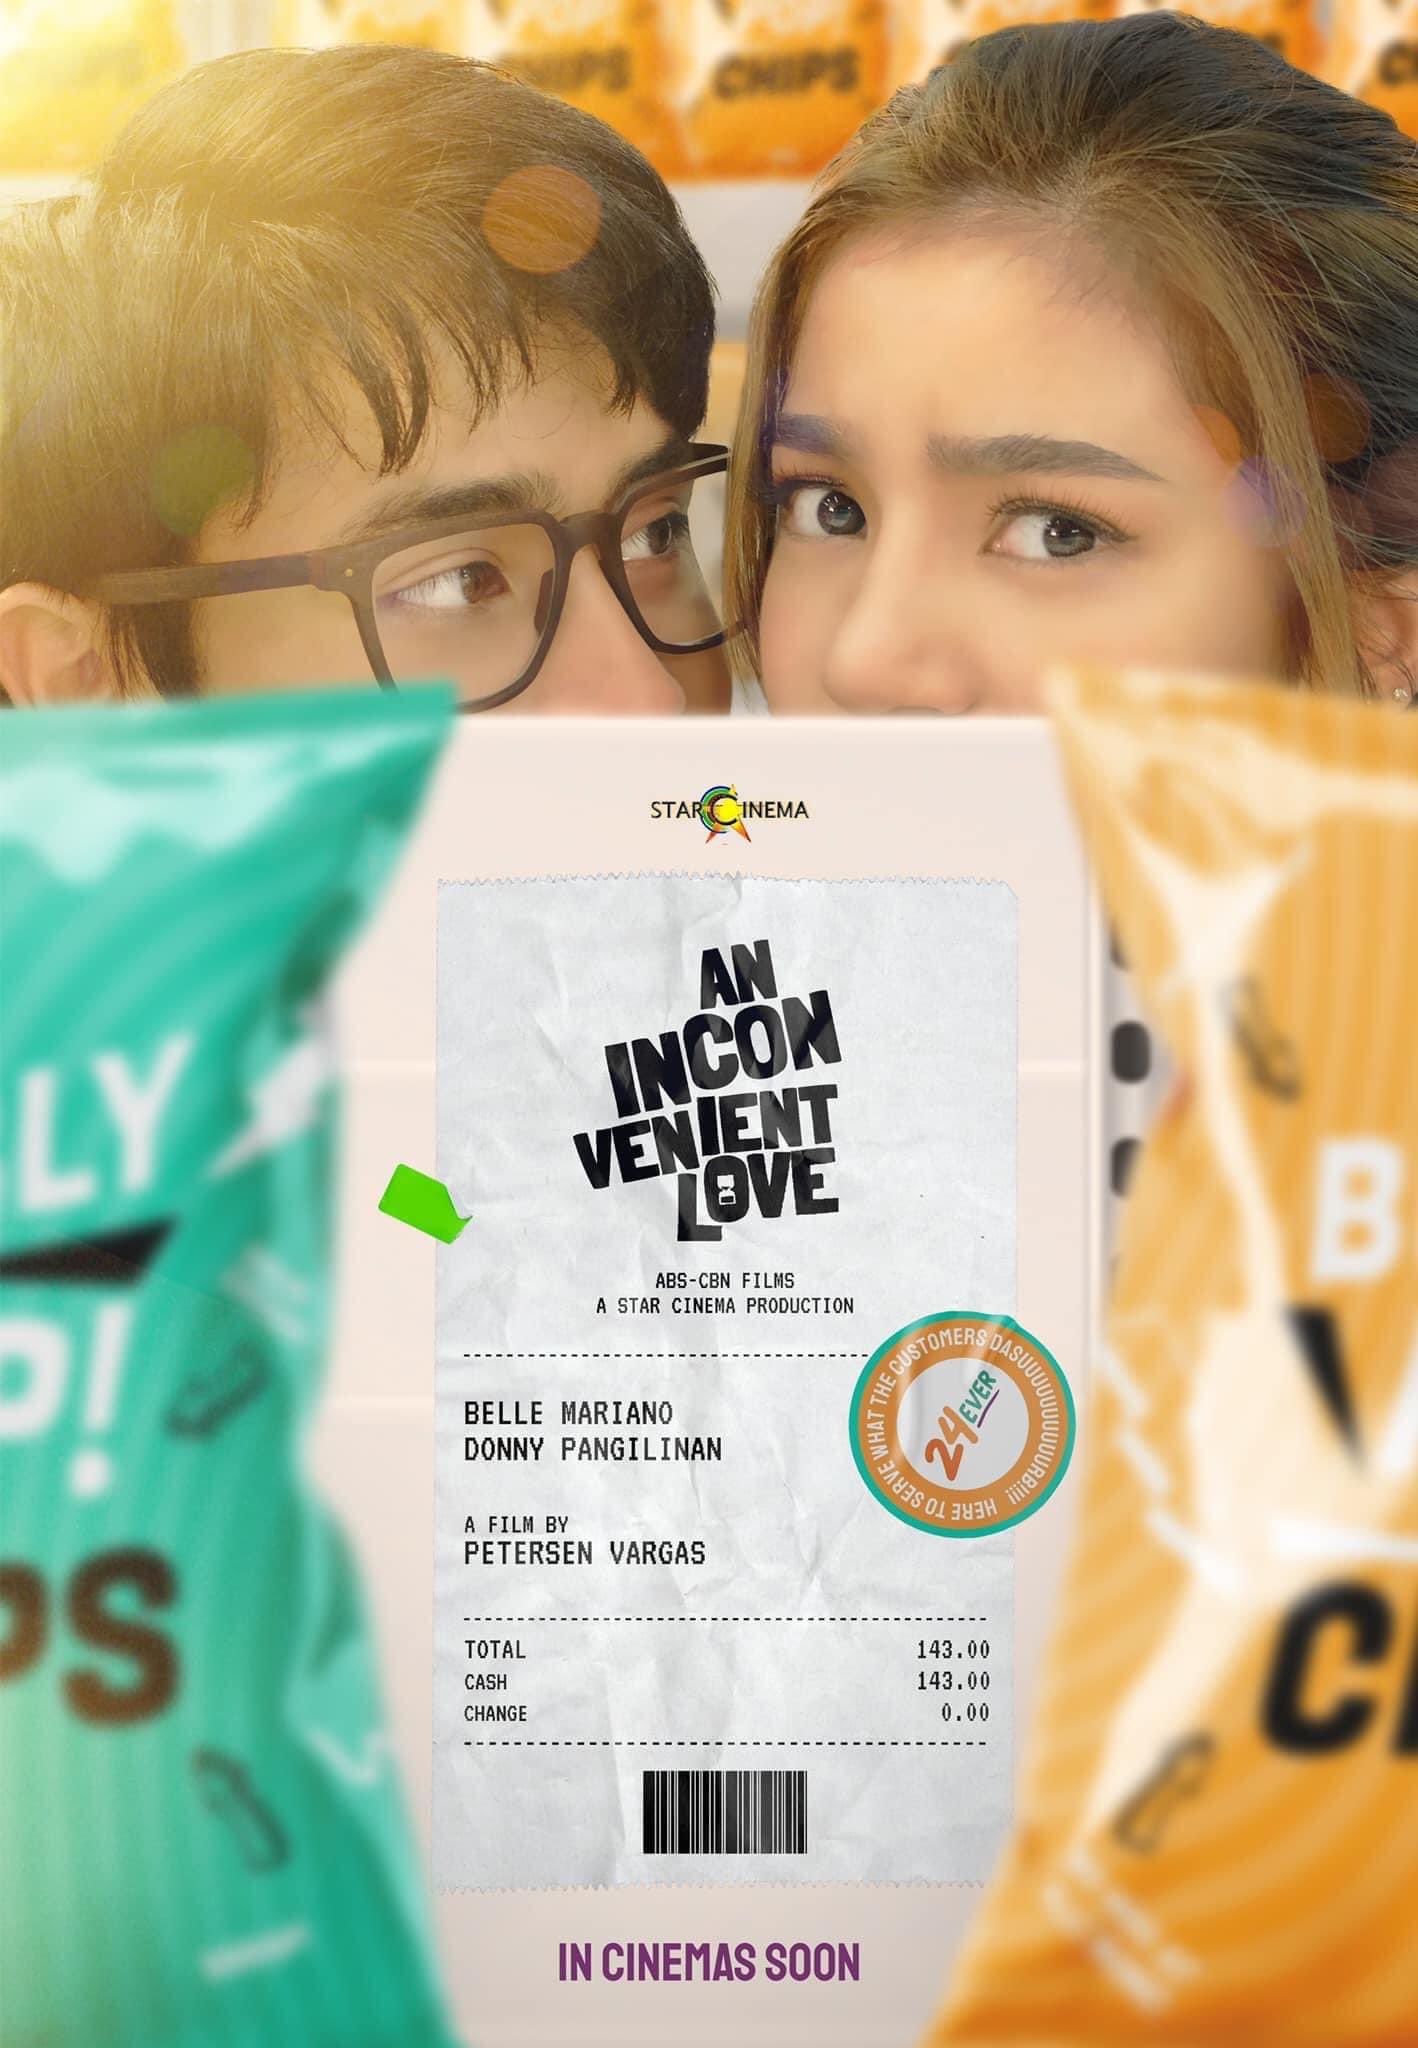 AN INCONVENIENT LOVE starring DonBelle's Donny Pangilinan and Belle Mariano